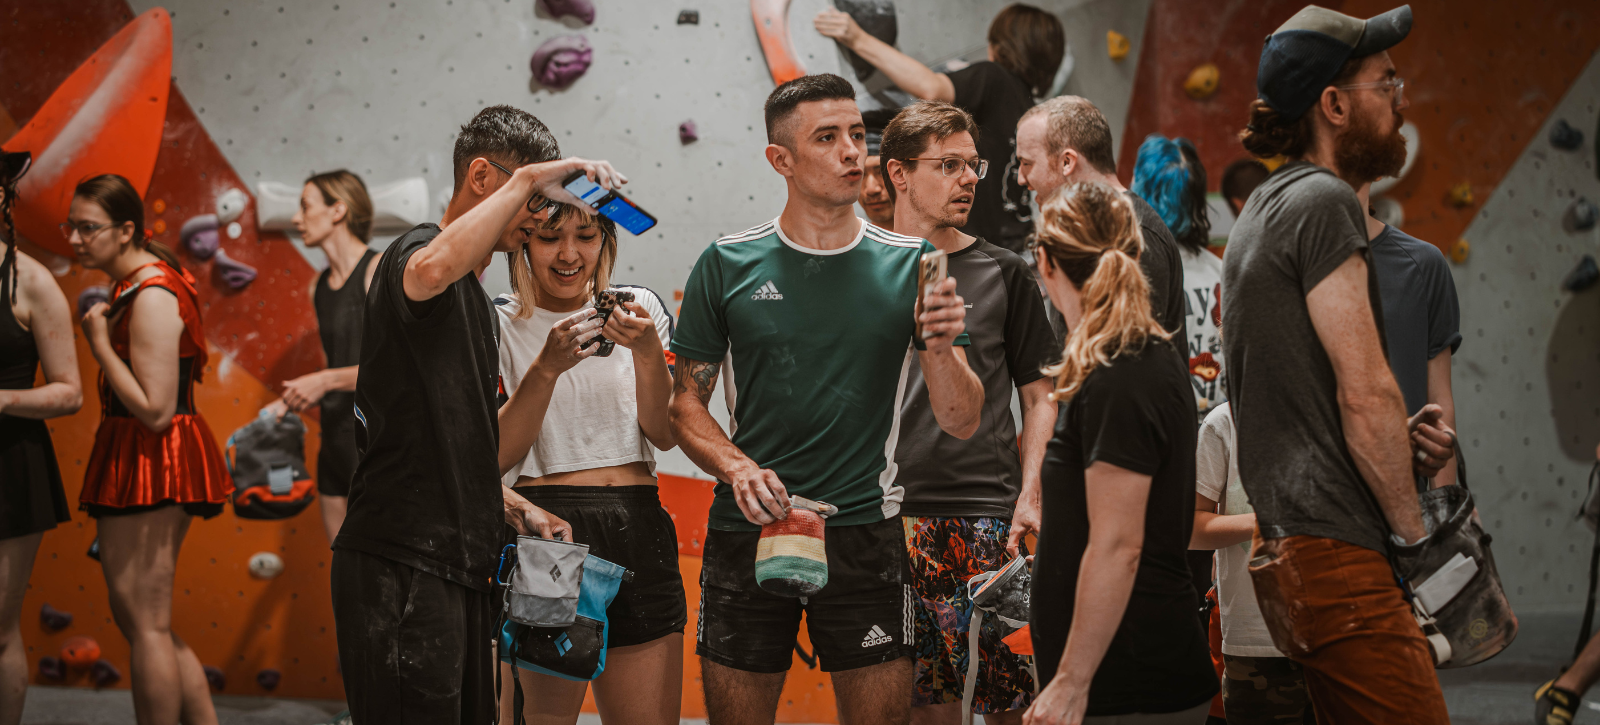 A mixed group of climbers stand on the bouldering mats chatting, laughing and looking at a phone